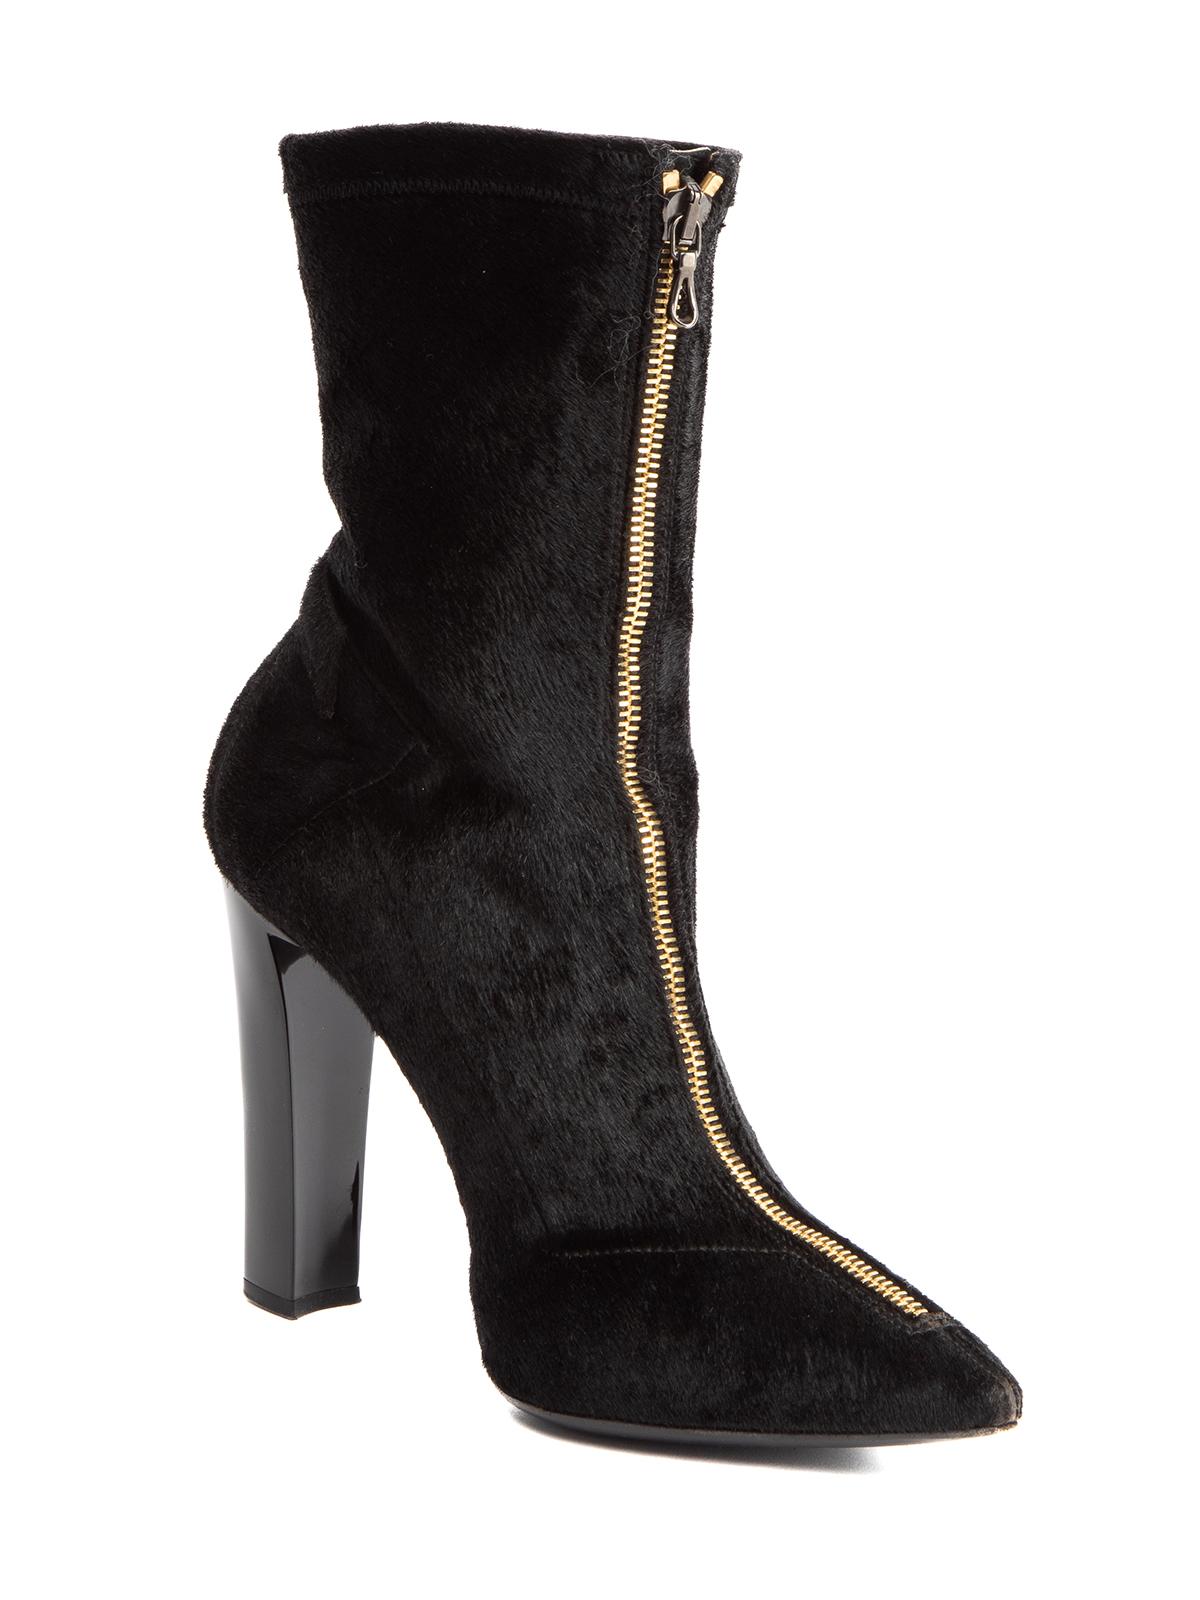 CONDITION is Very good. Minimal wear to boots is evident. Minimal wear to Toe point and outsole on this used Roland Mouret designer resale item. Details Black Pony-style calf skin Heeled ankle boots Pointed toe Zip at the front High heel Embossed